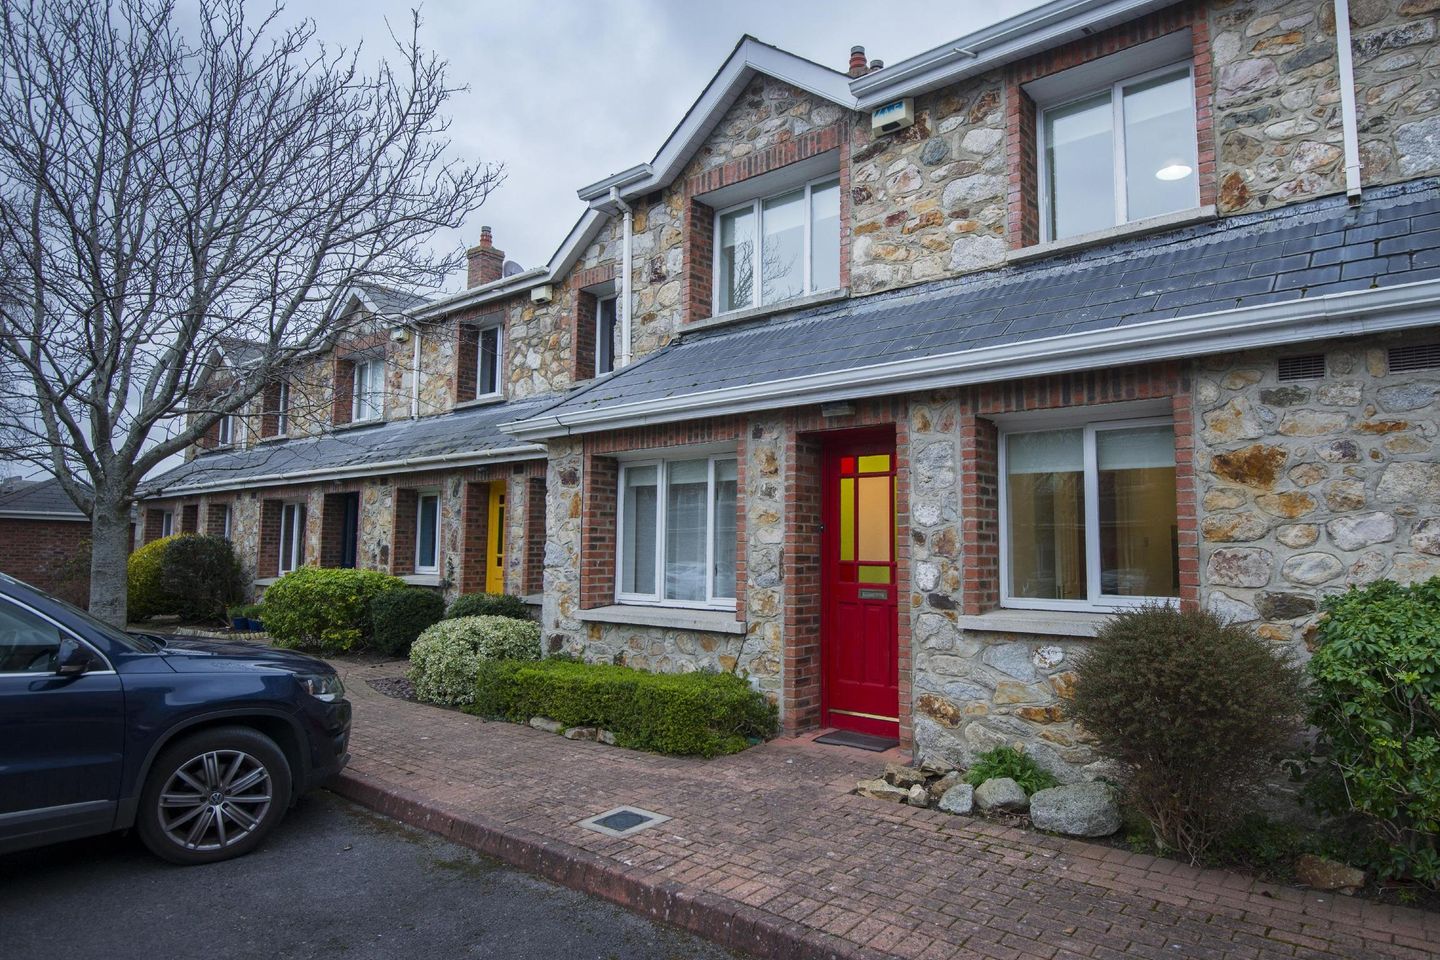 21 The Maltings, Bray, Co. Wicklow